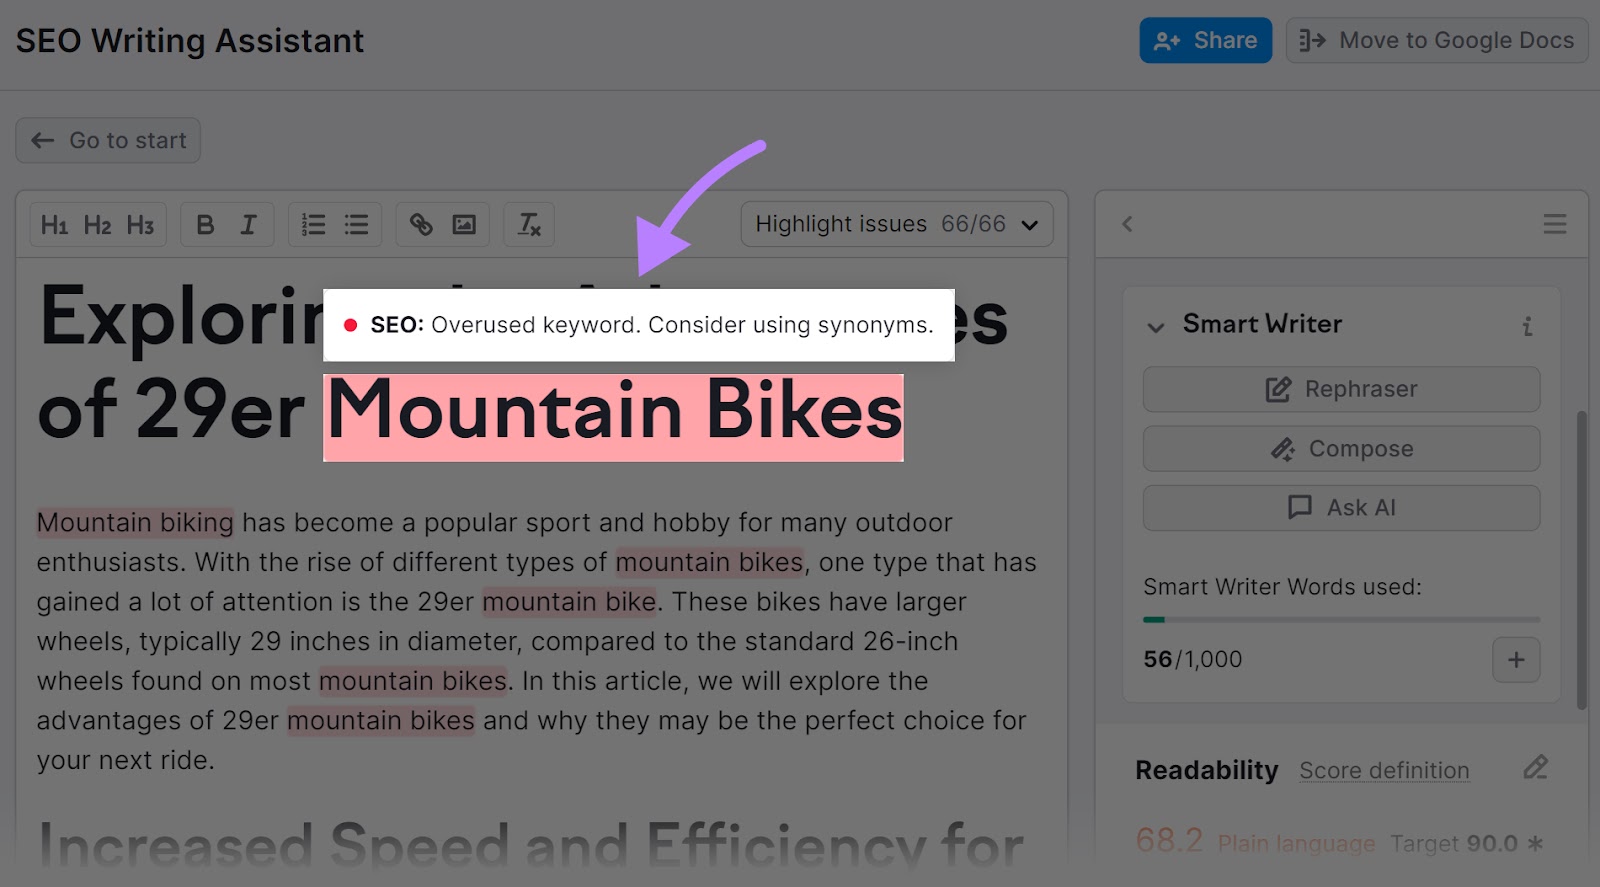 "mountain bikes" keyword highlighted in SEO Writing Assistant